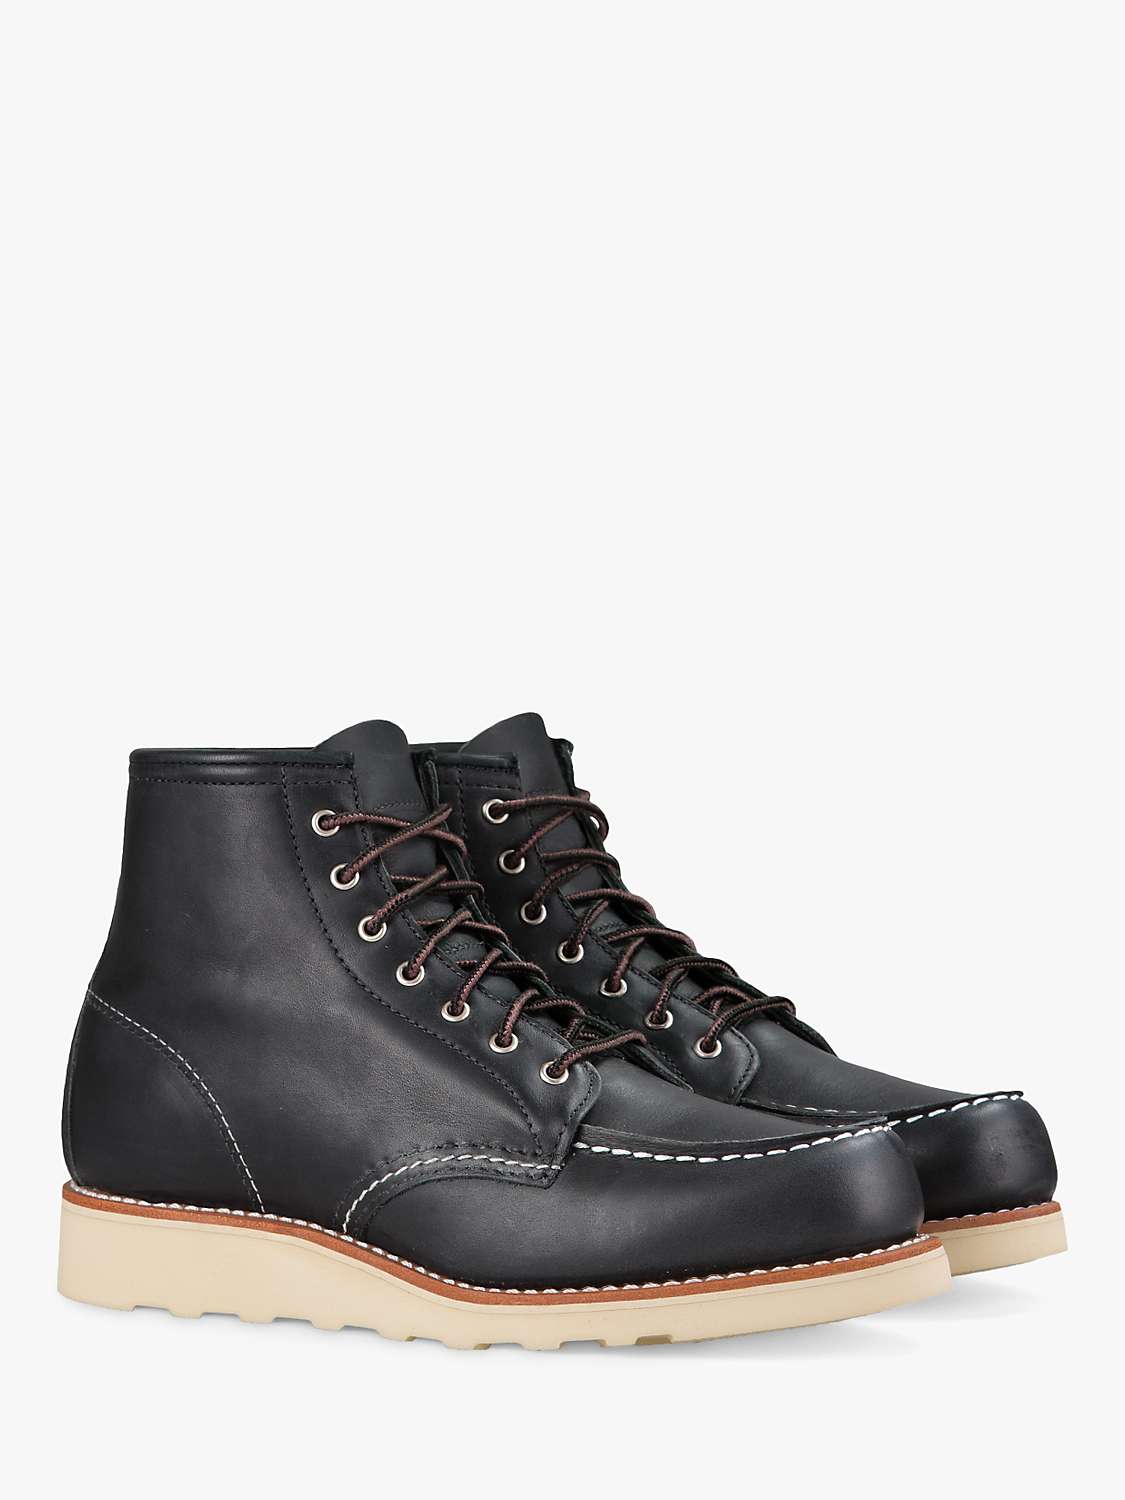 Buy Red Wing 6" Moc Toe Leather Lace-Up Boots Online at johnlewis.com